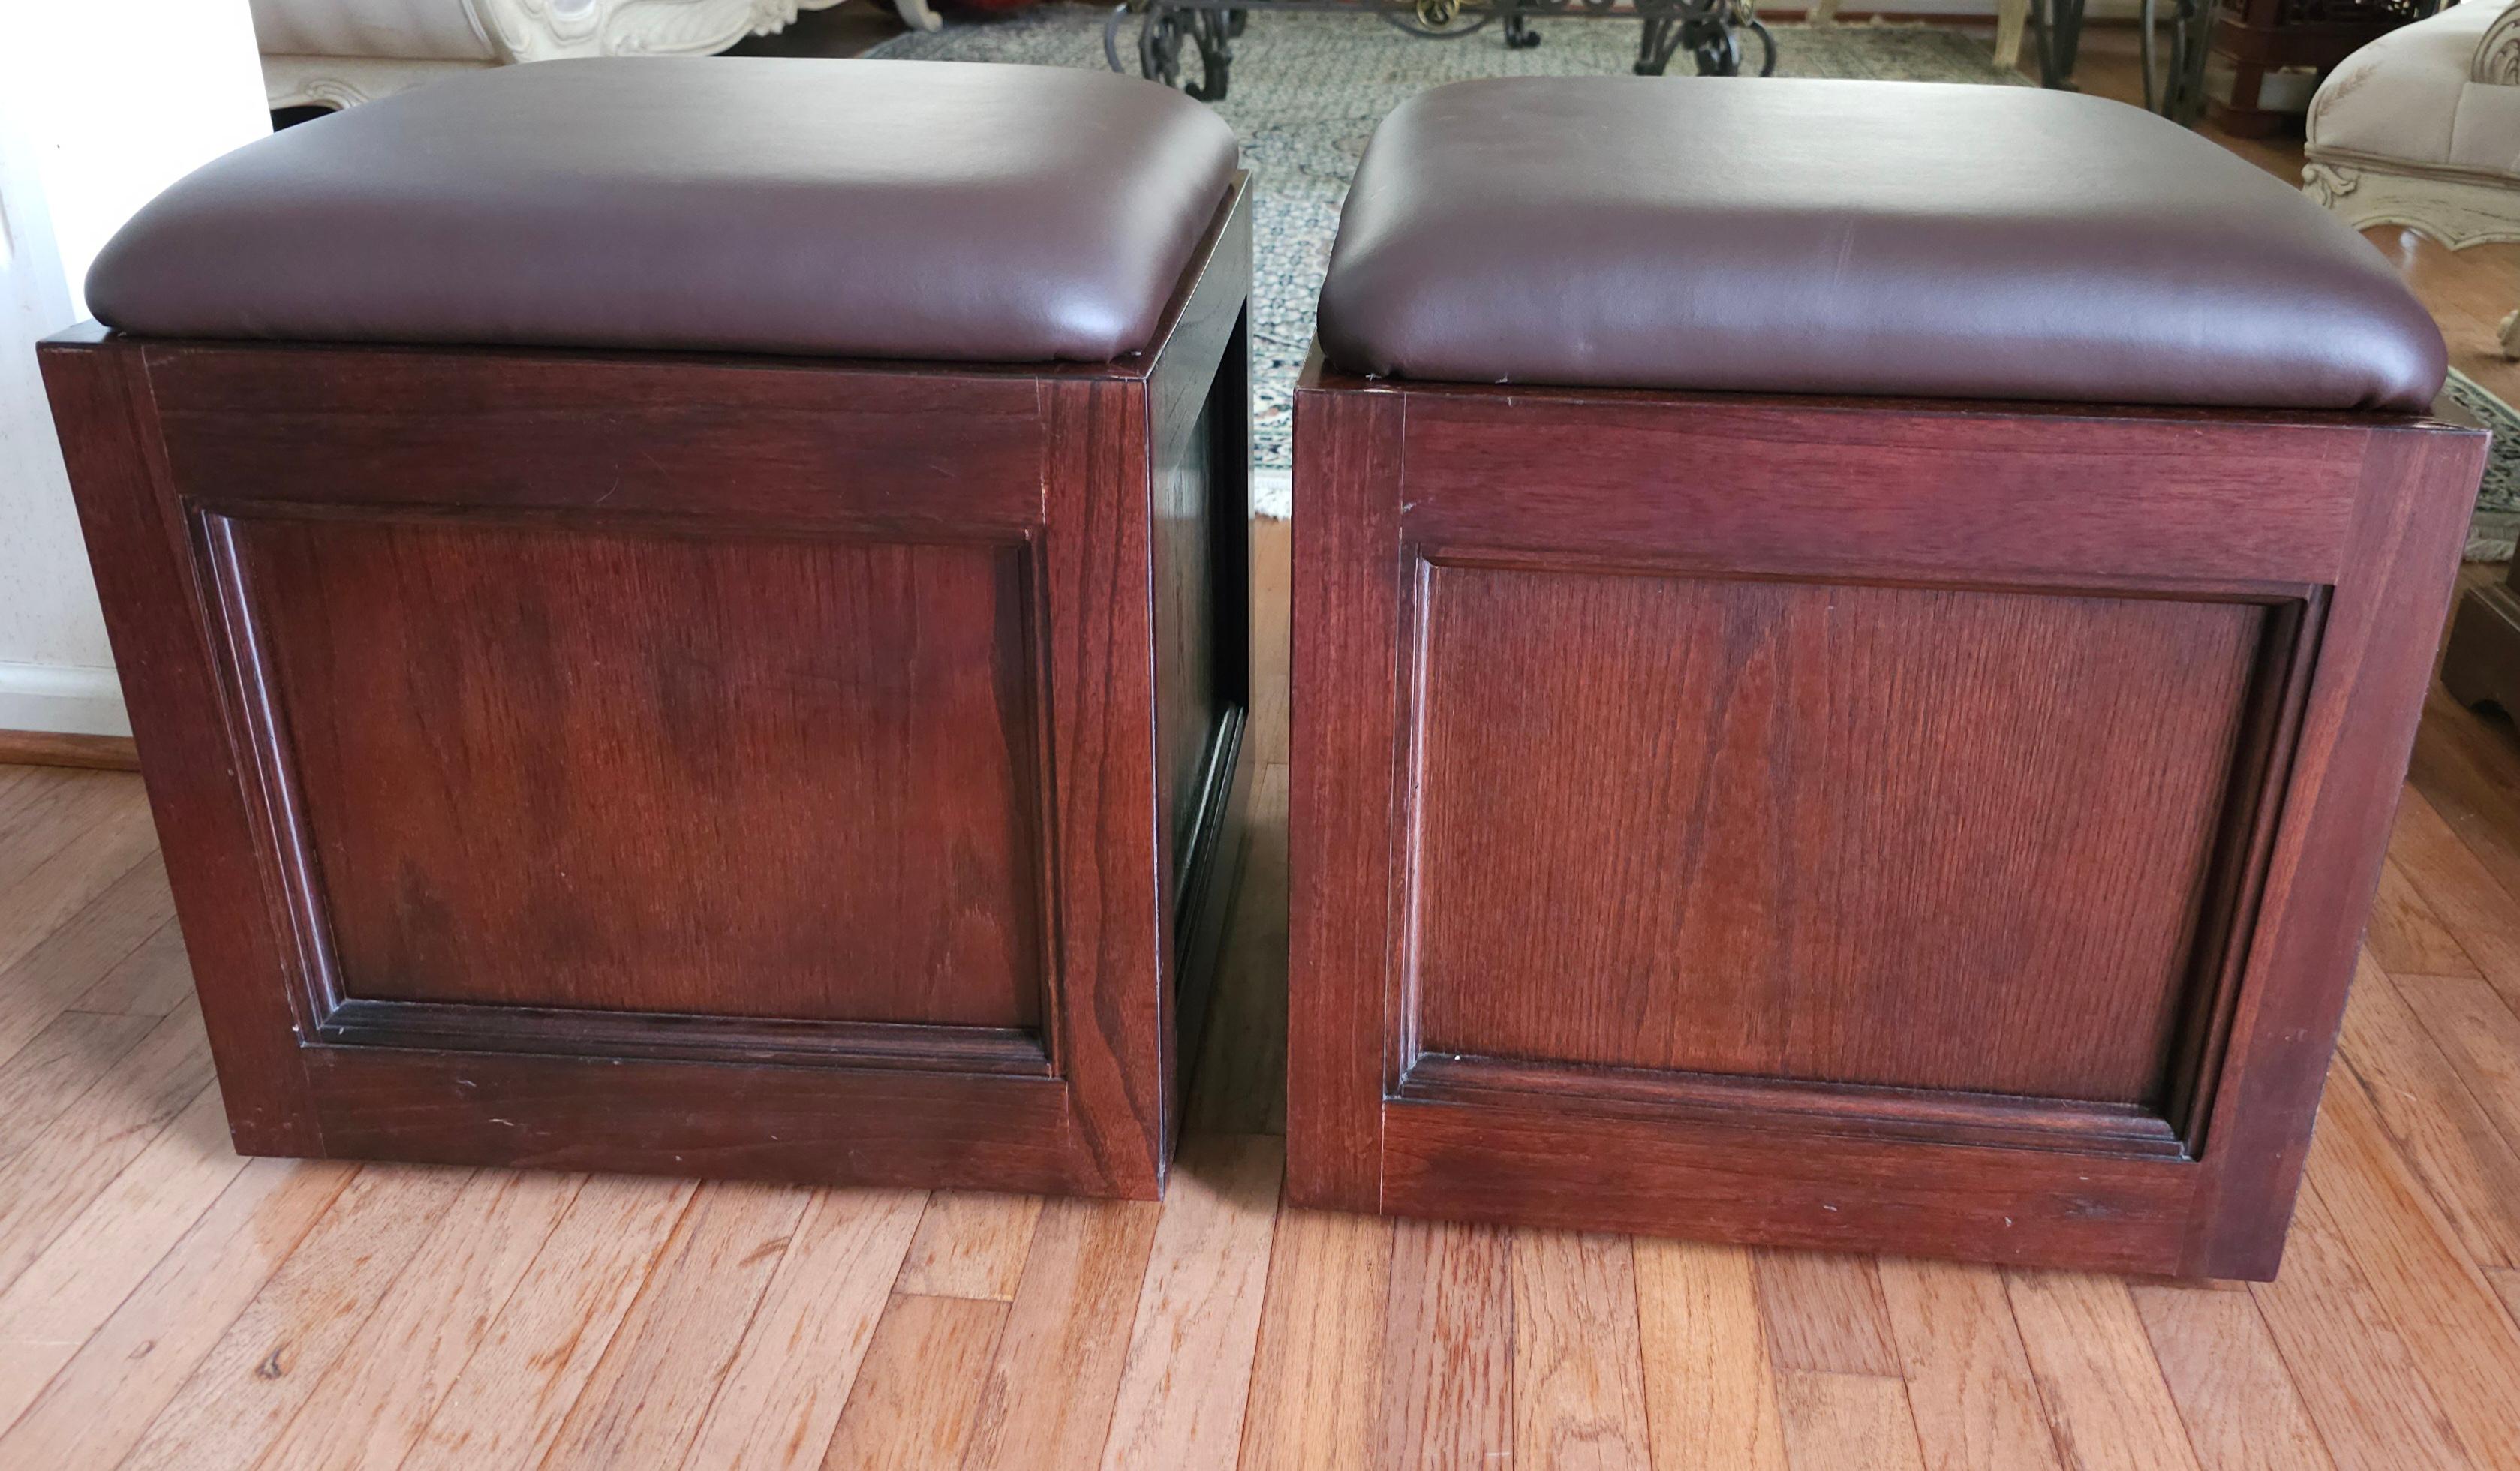 A Pair Of  Fruitwood And Brown Leather Rolling Storage Ottomans by Hammary Furniture of Lenoir, North Carolina.
Measures 18